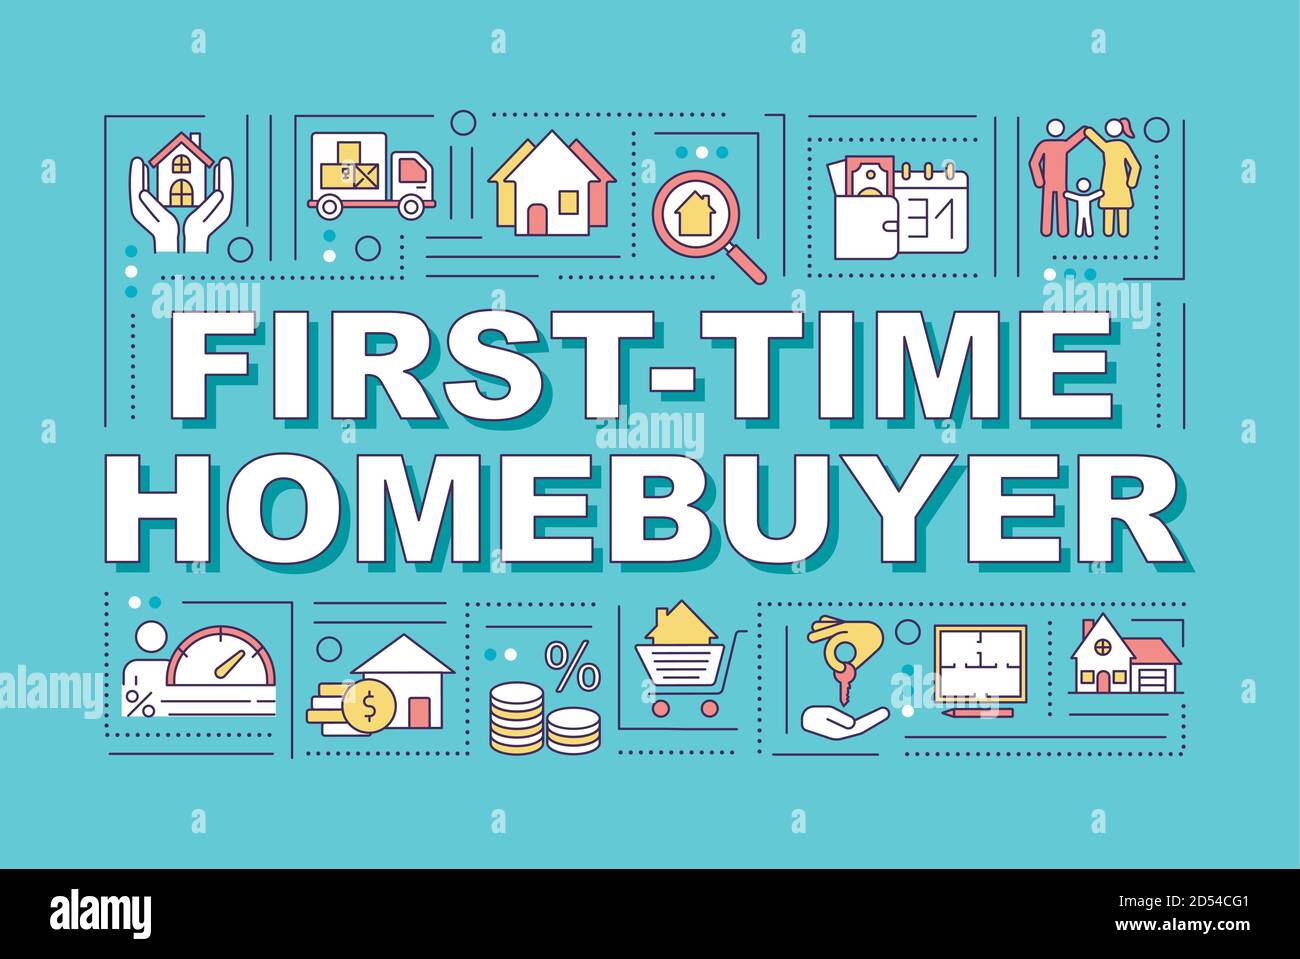 First-time homebuyer word concepts banner Stock Vector